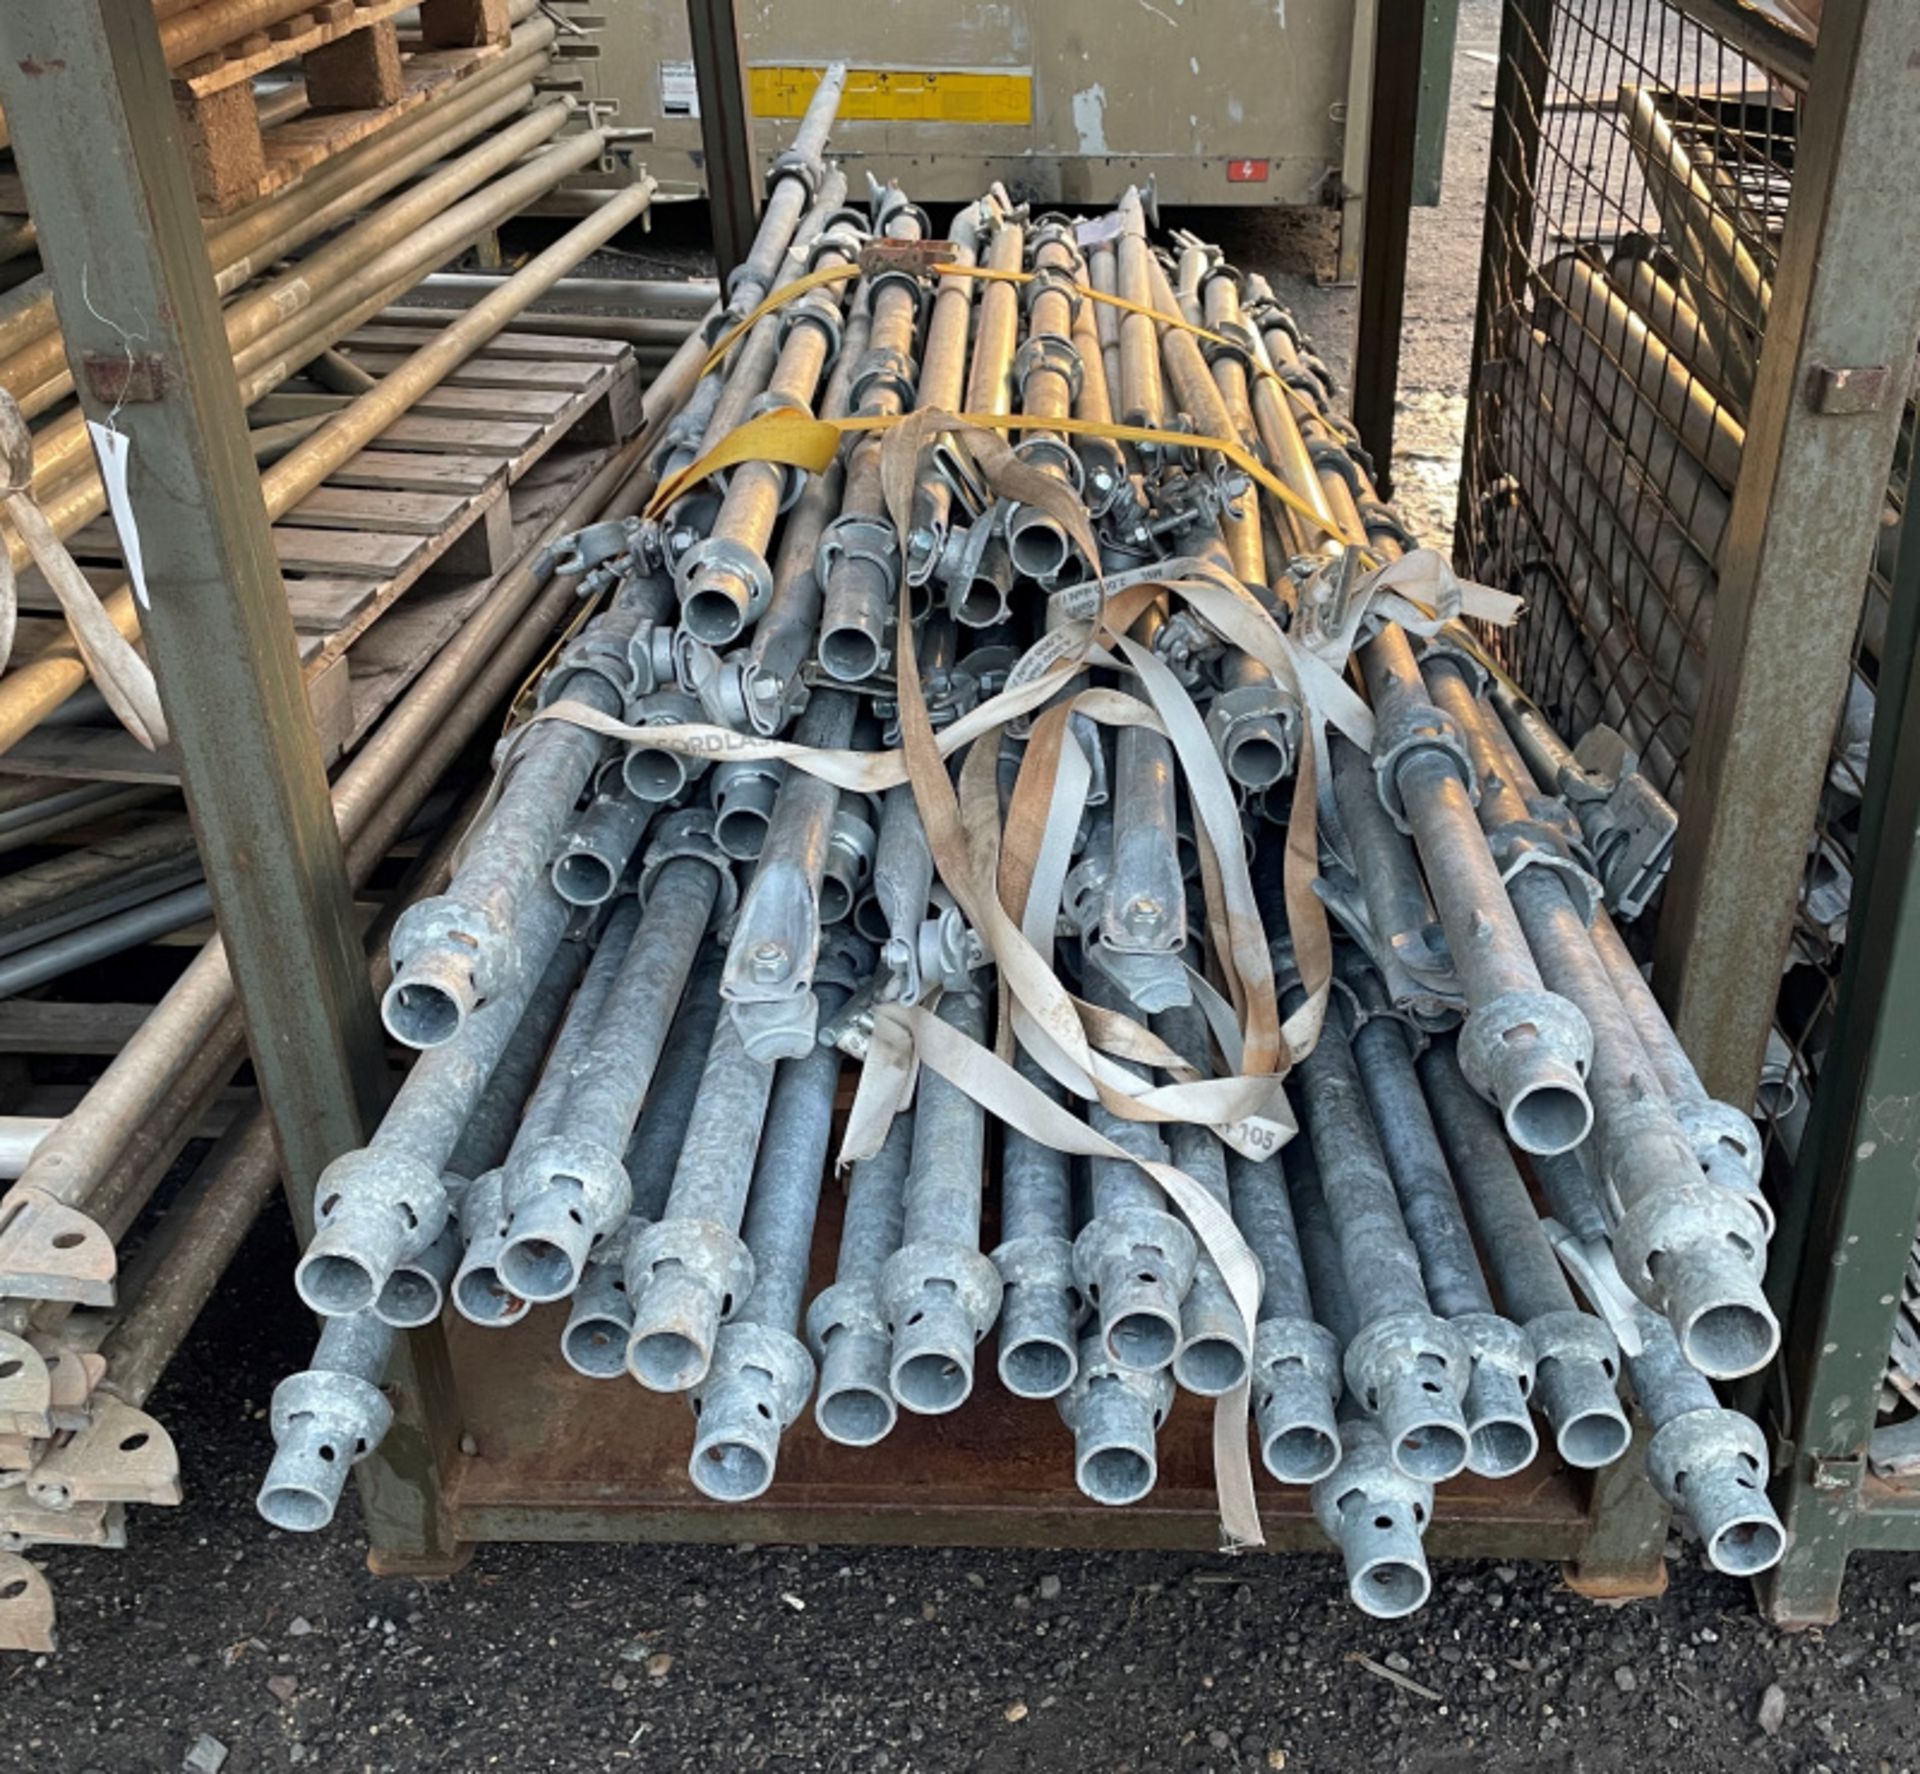 Various Cuplok scaffolding components - poles, planks, connectors - see pictures for more details - Image 38 of 38